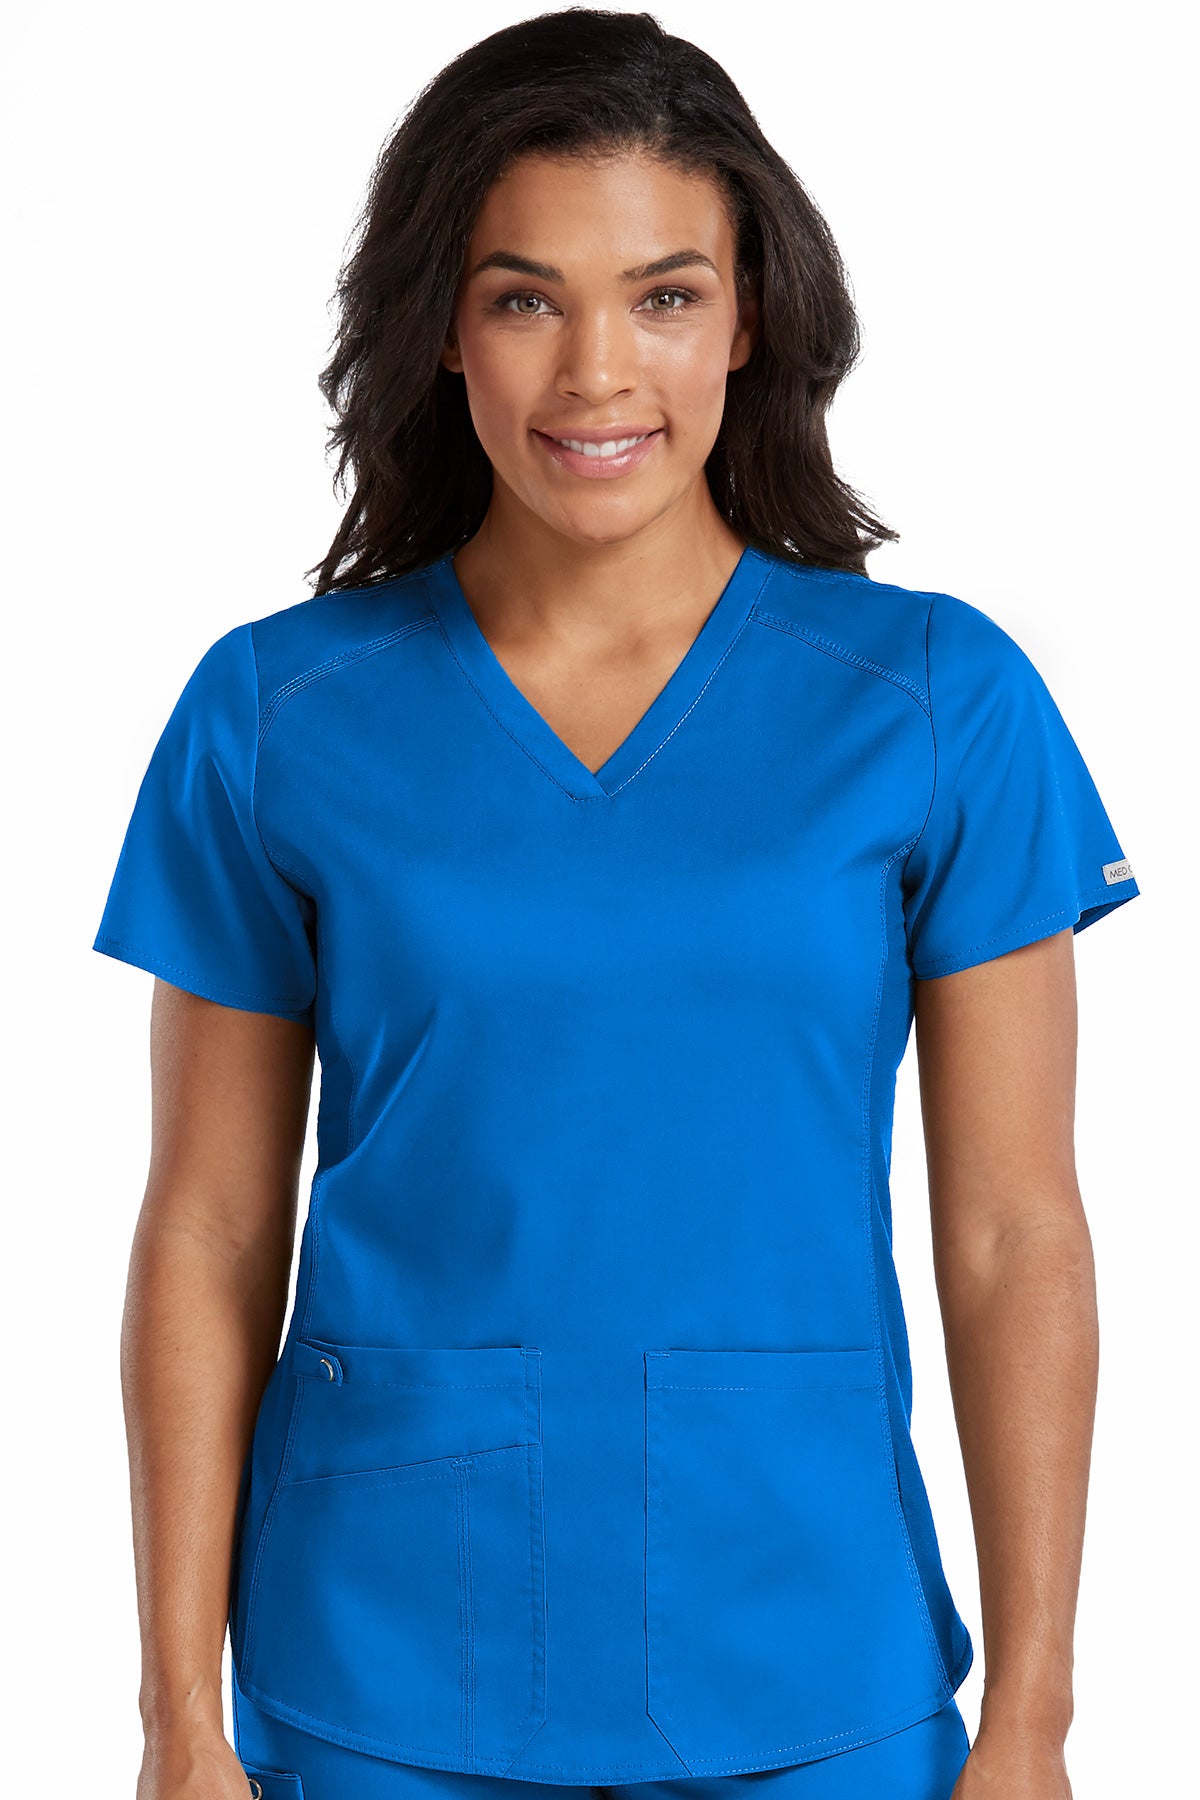 Med Couture Scrub Top Touch Shirttail V-Neck in Royal at Parker's Clothing and Shoes.